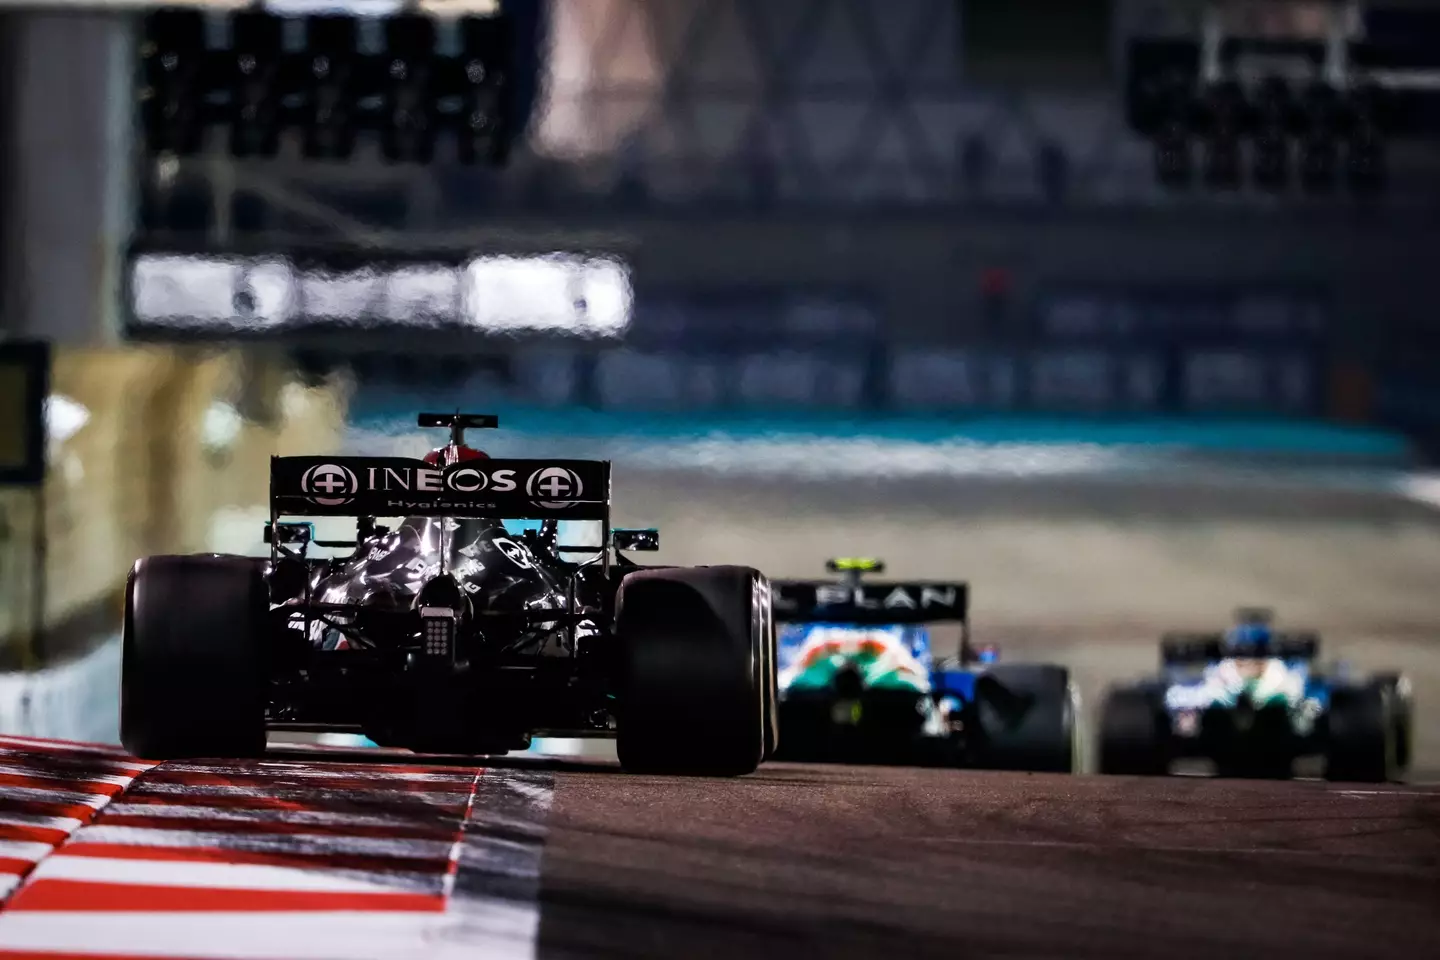 Hamilton was in the lead for much of the Abu Dhabi Grand Prix 2021.